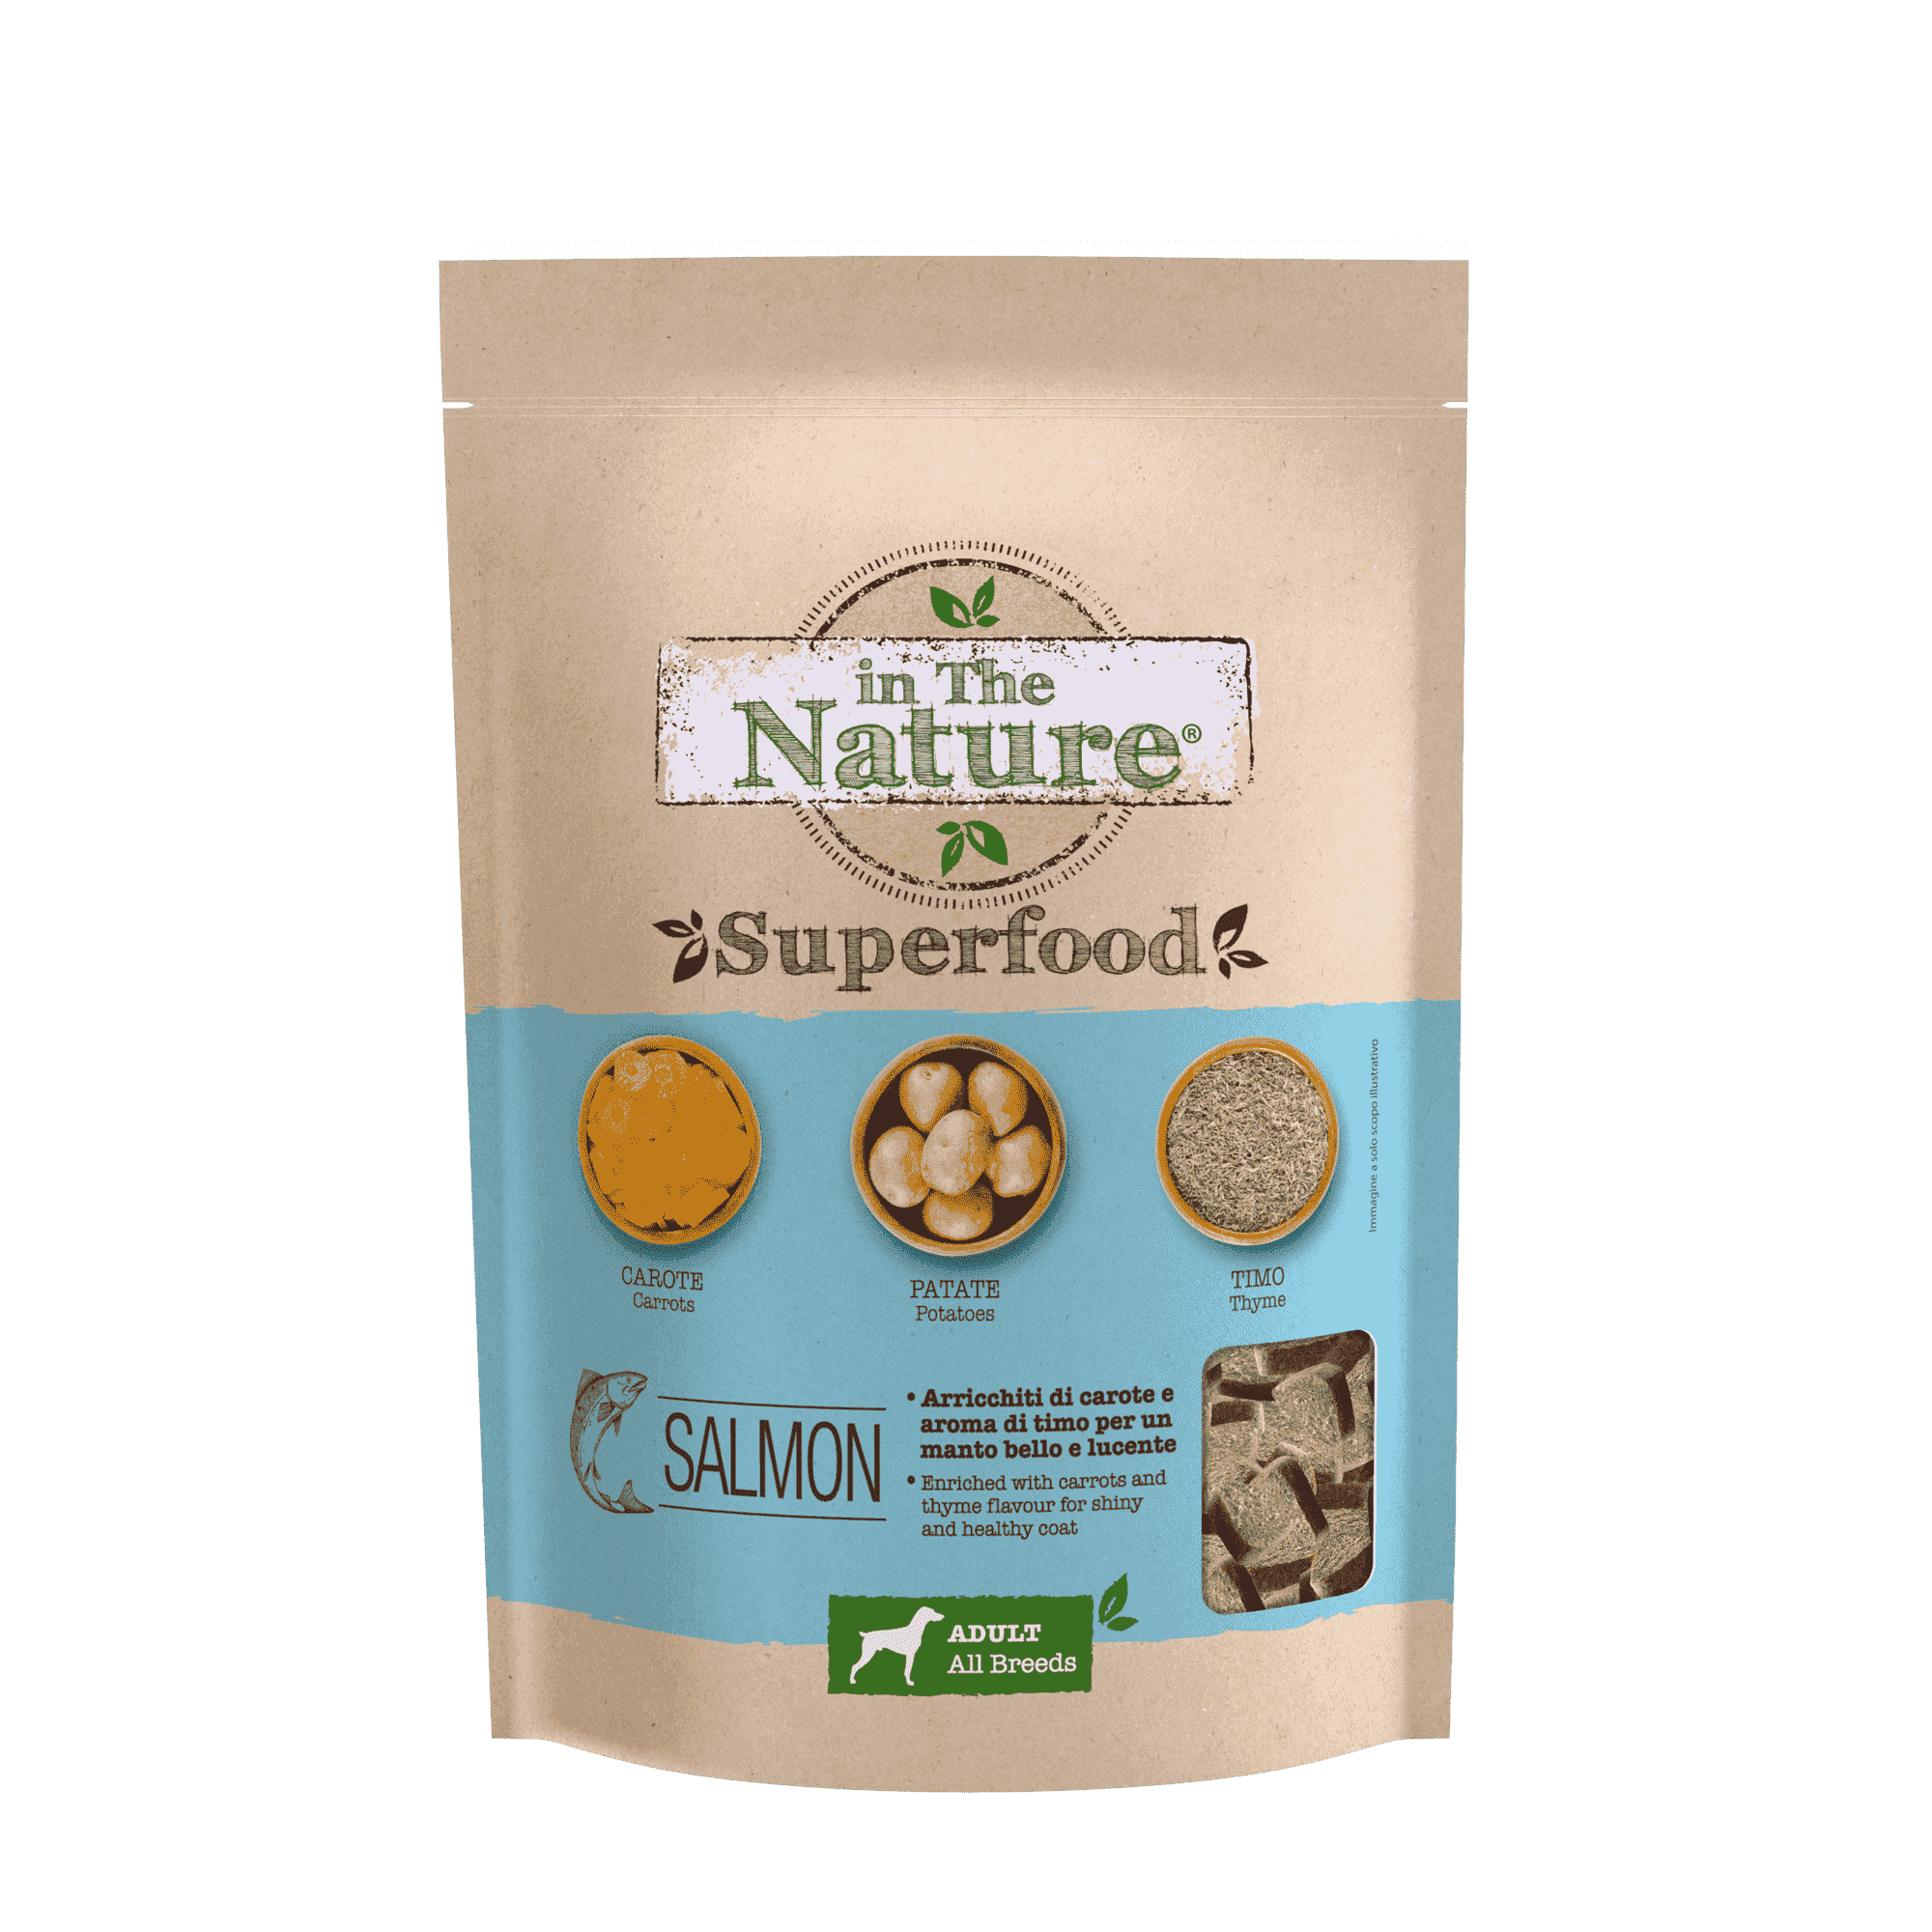 IN THE NATURE SNACK SUPERFOOD